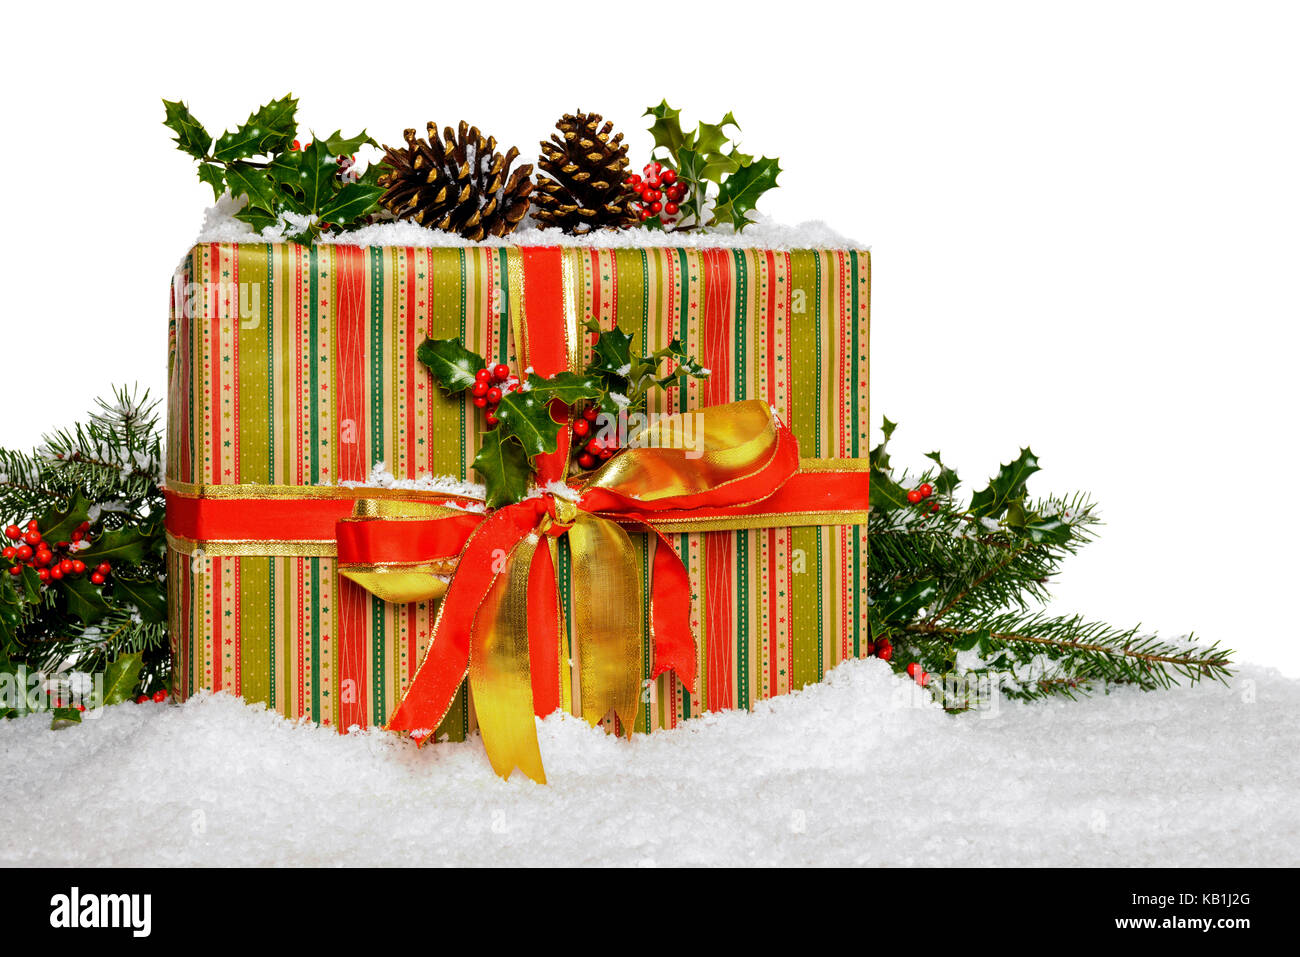 A gift wrapped Christmas present with holly and snow against a white background. Stock Photo